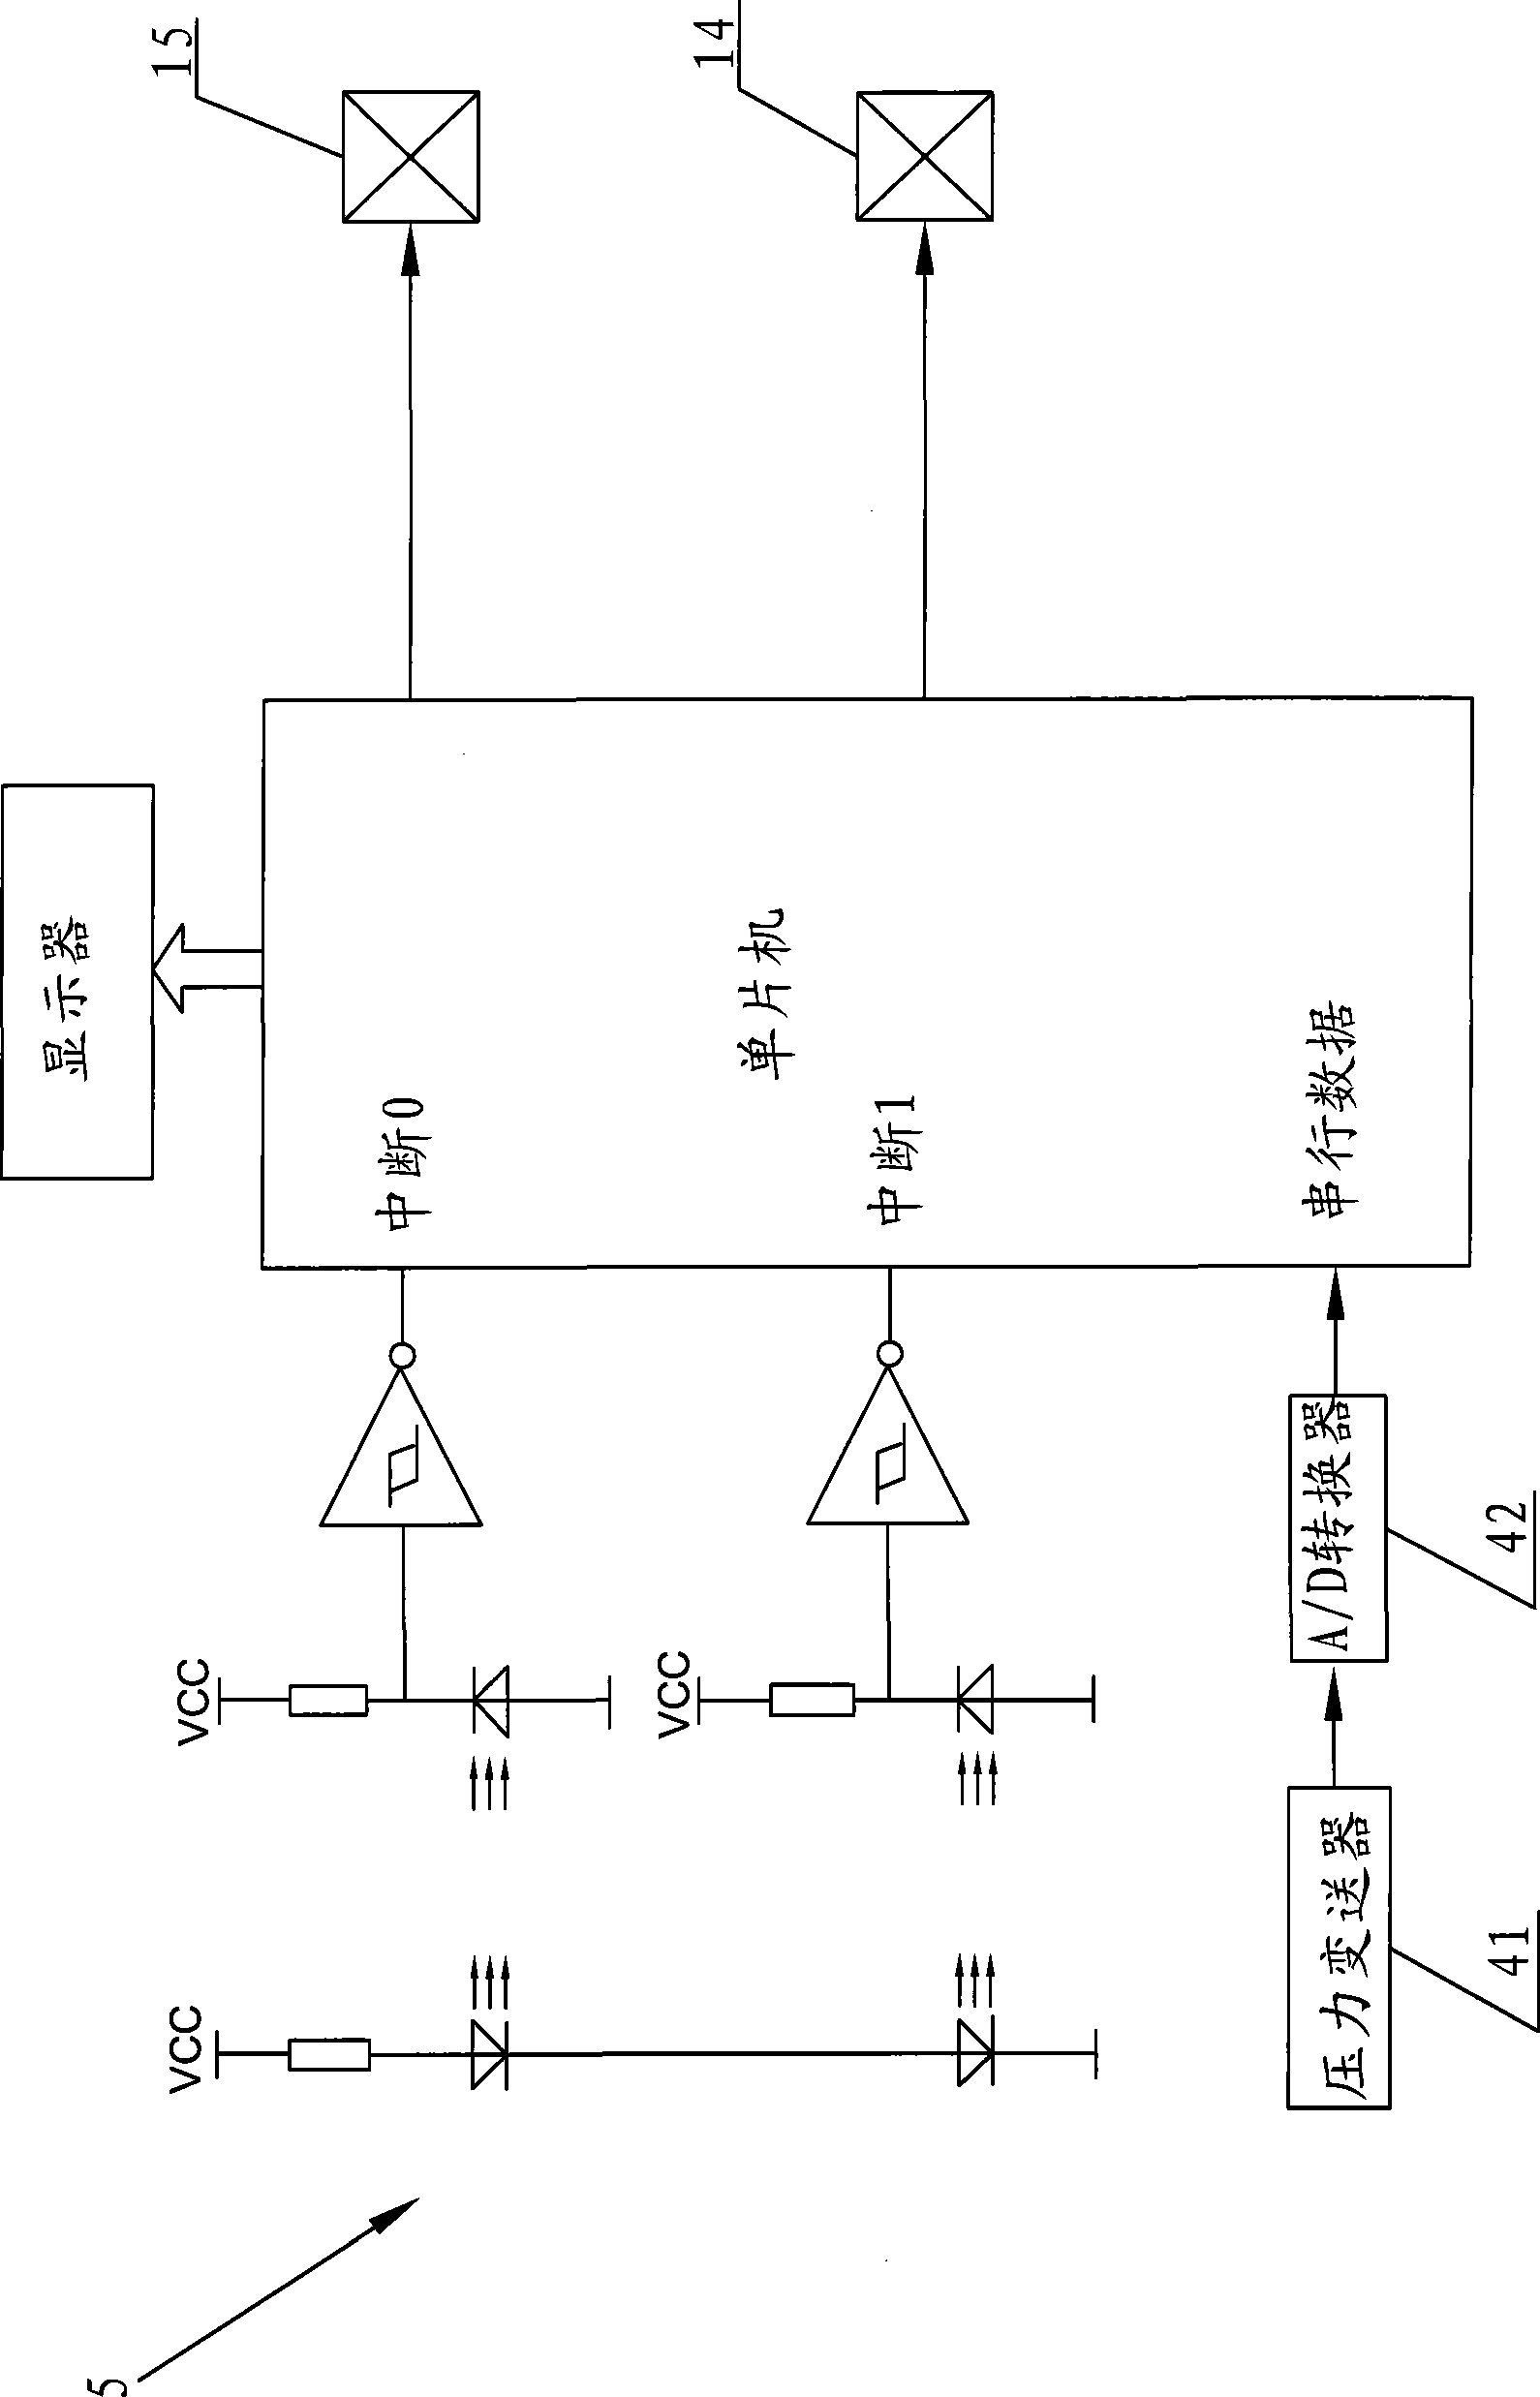 High-speed particle impact test apparatus